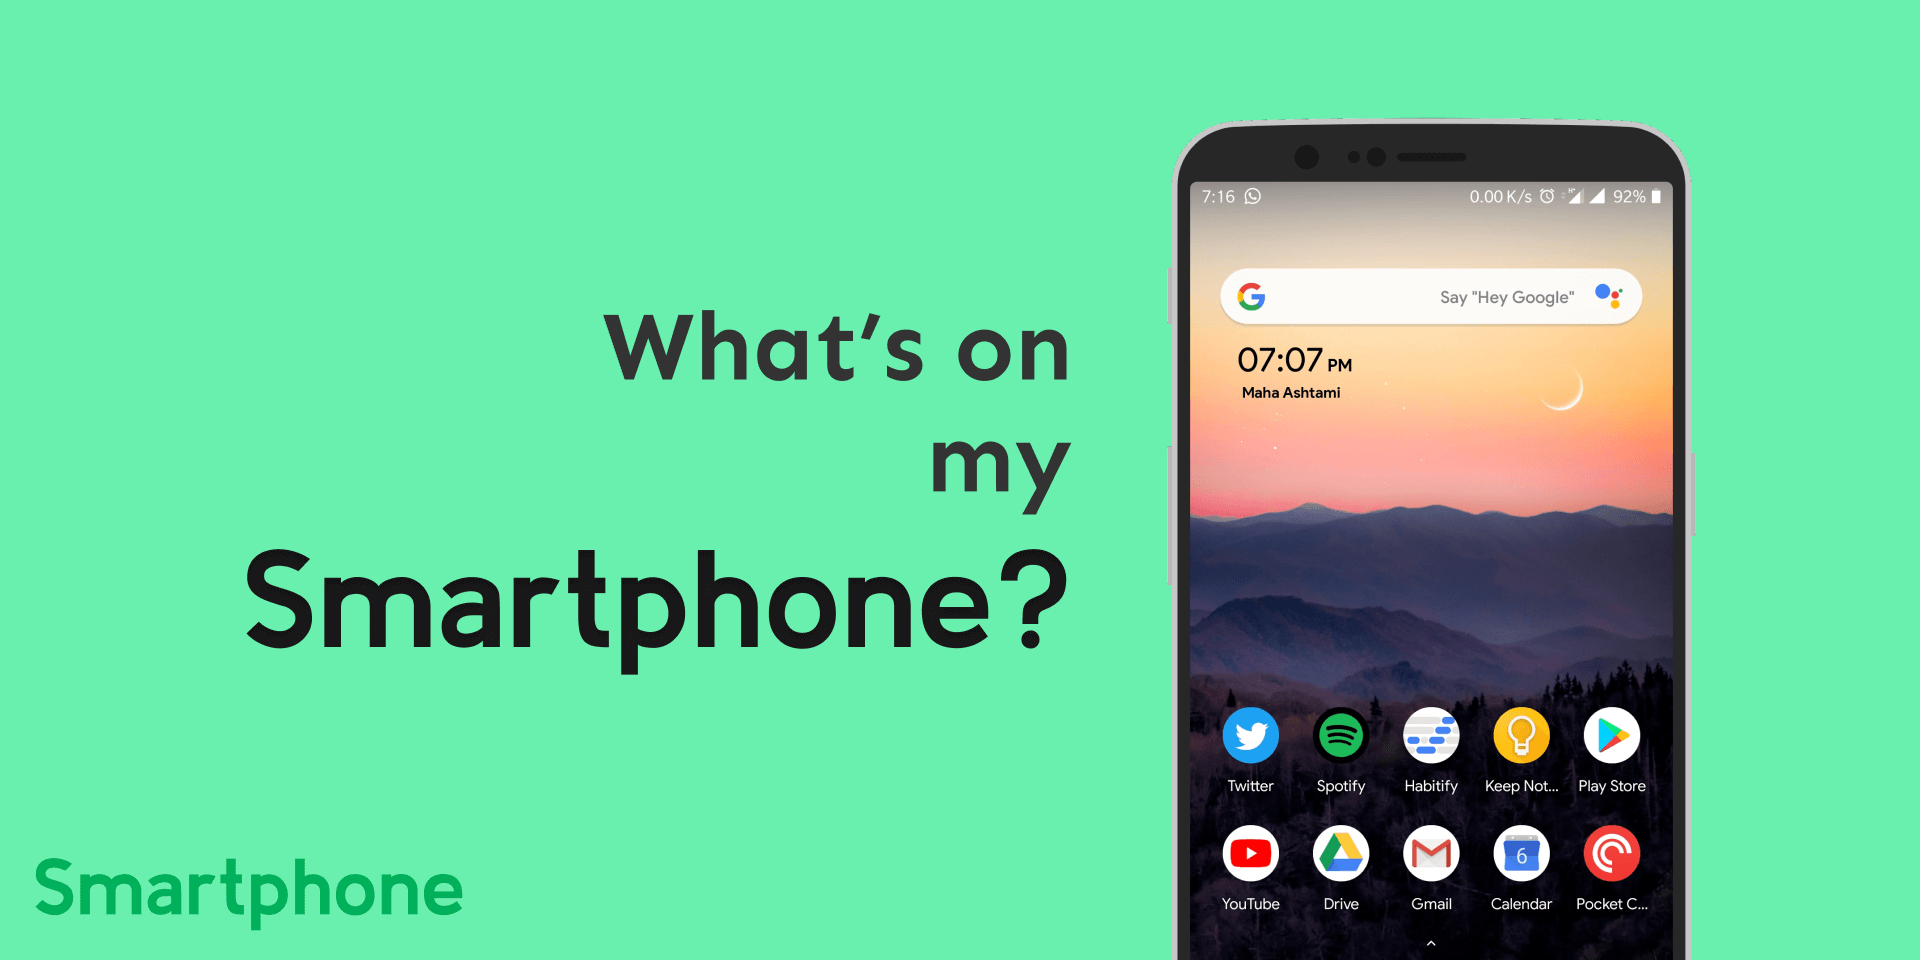 What's on my Smartphone?